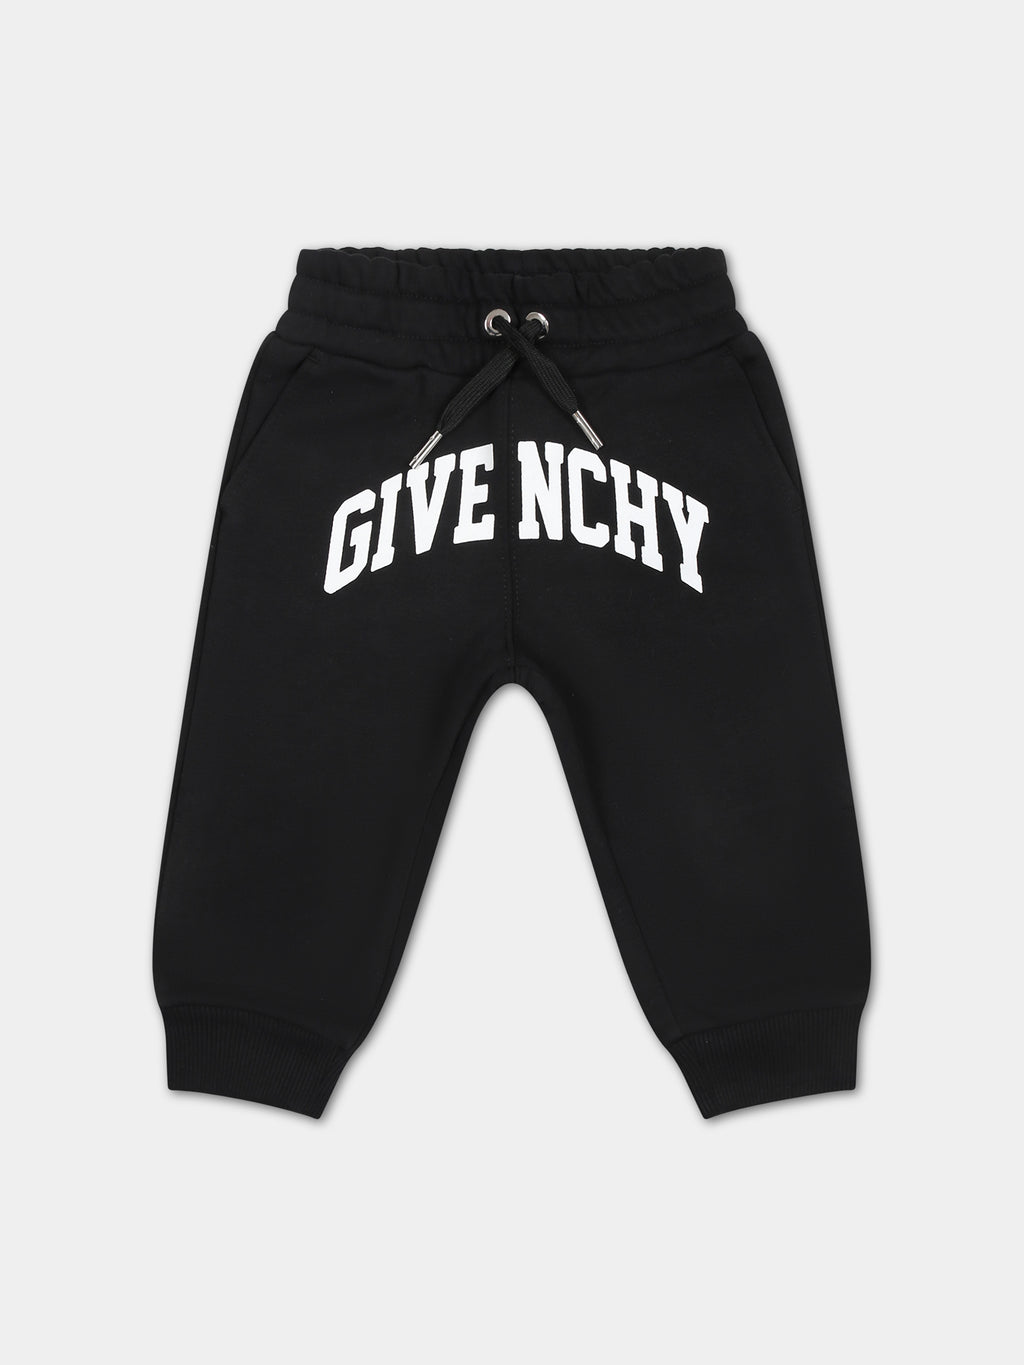 Black tracksuit trousers fpr baby boy with logo